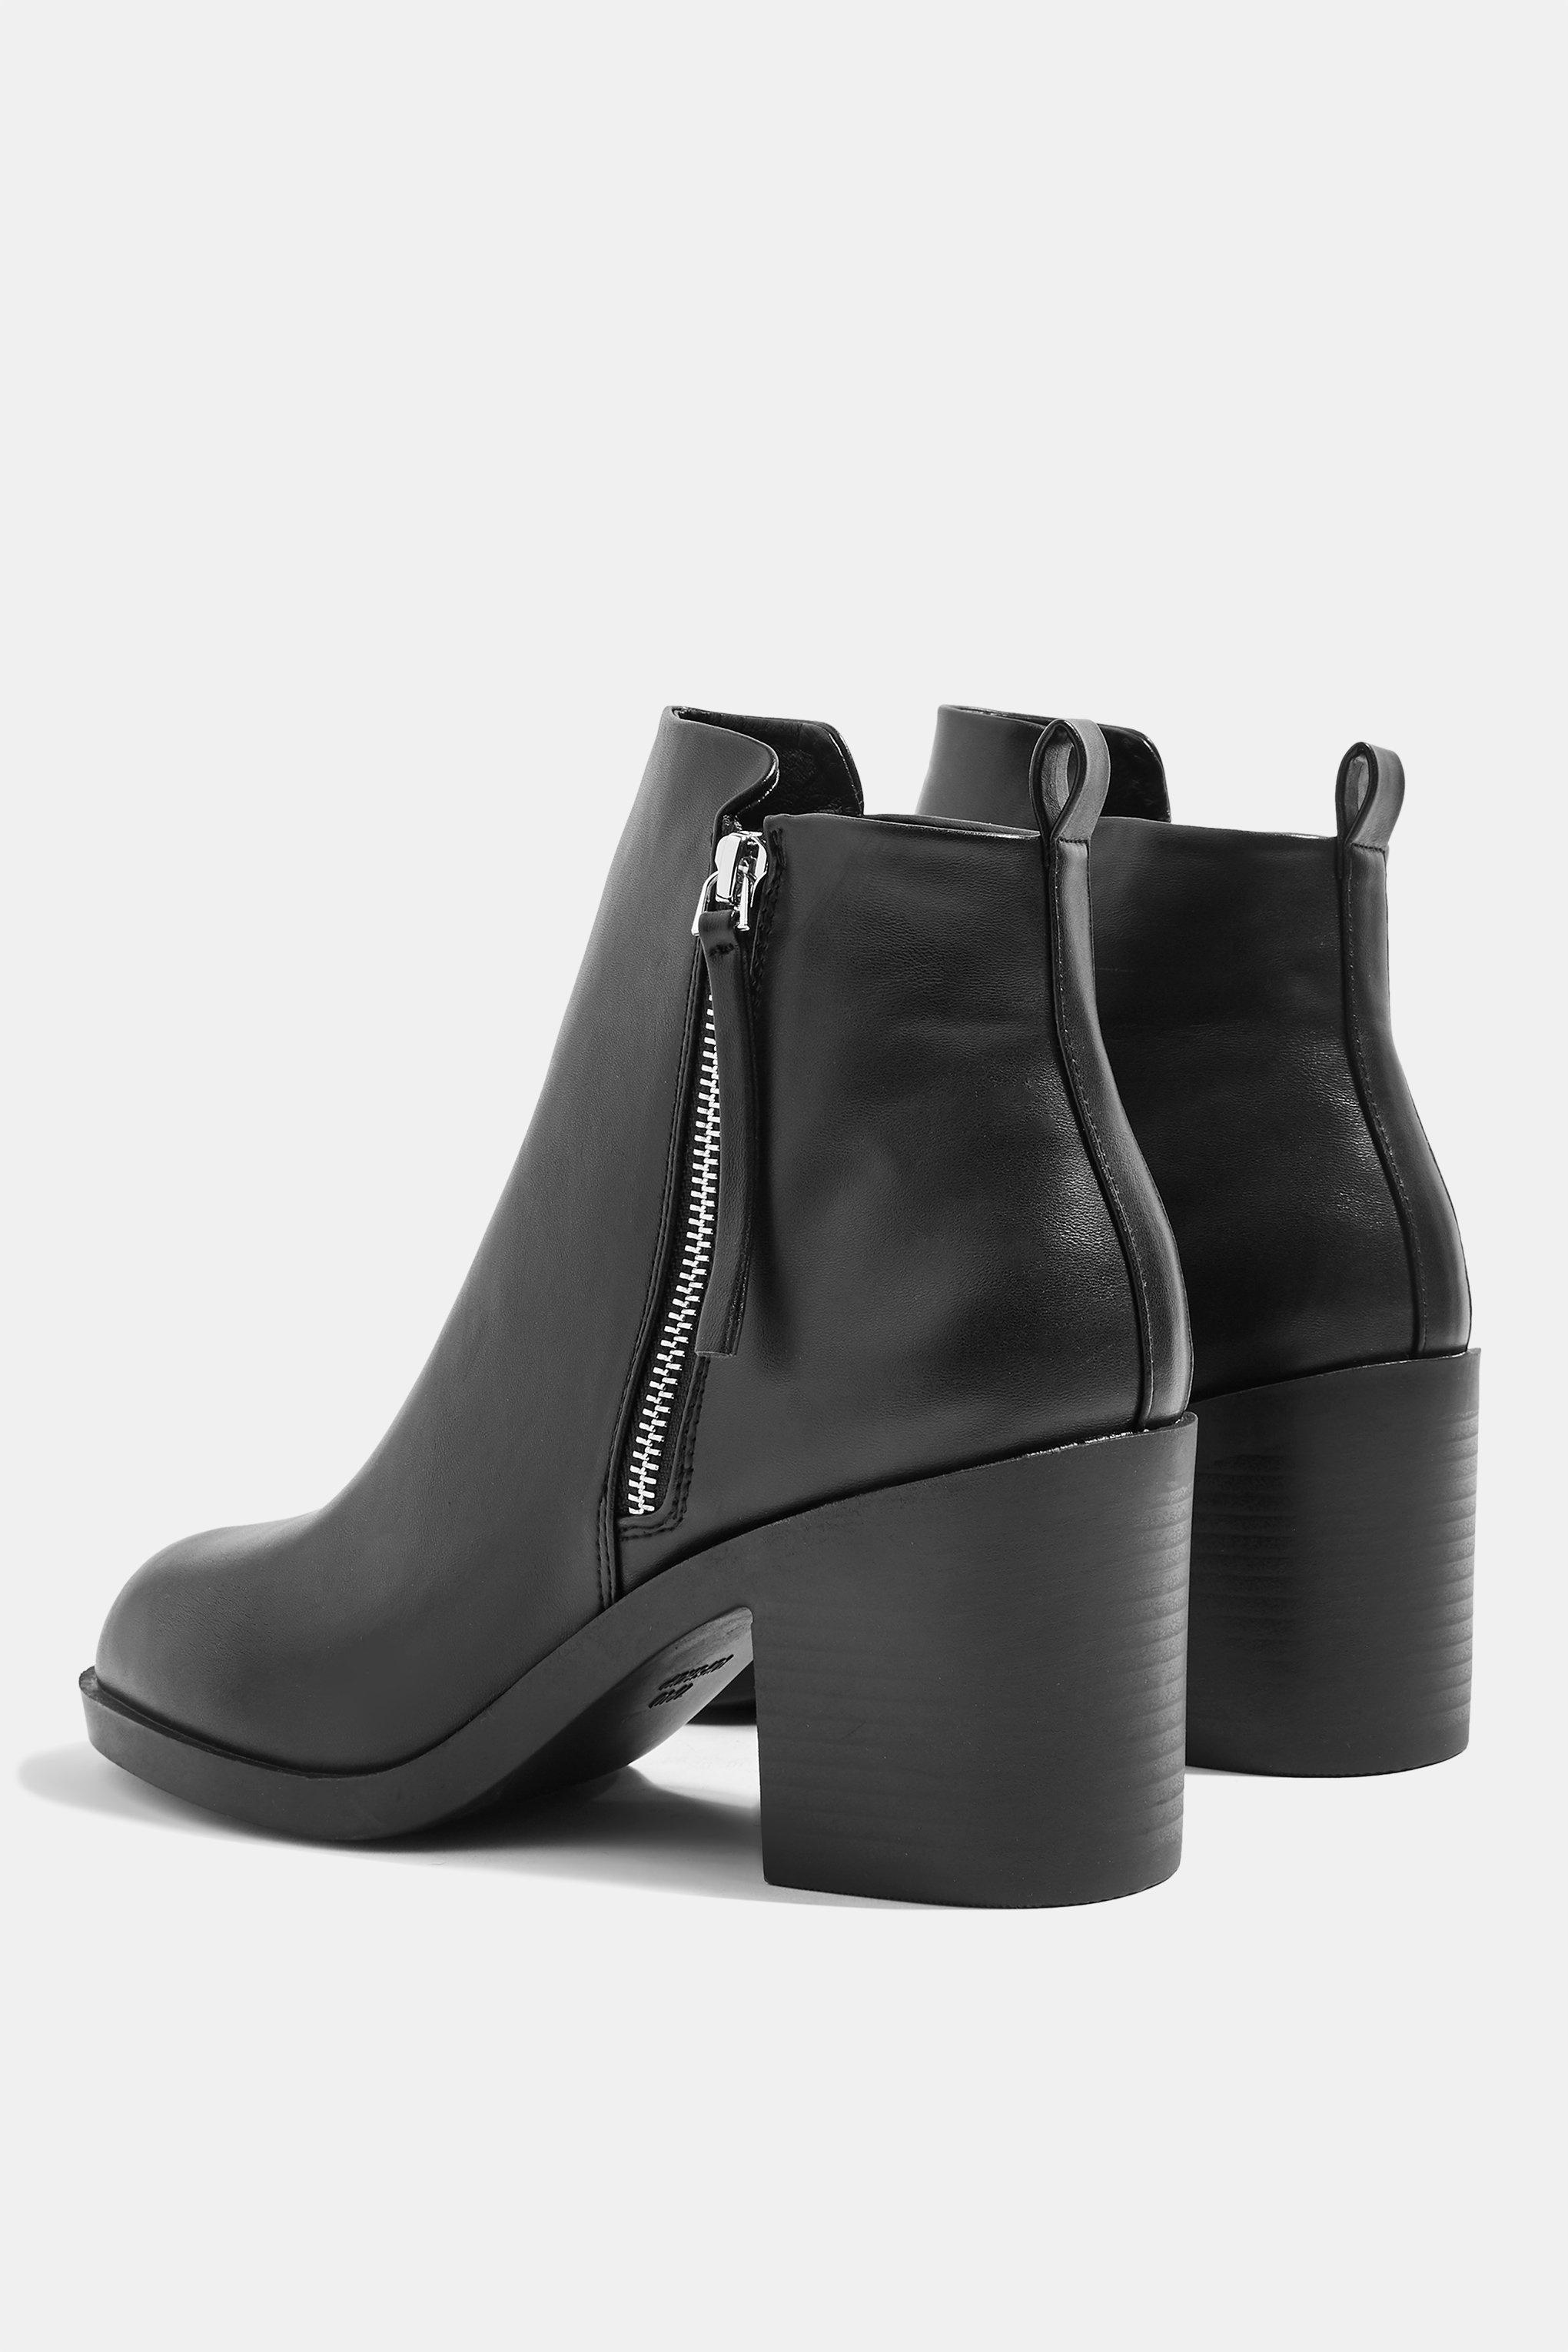 TOPSHOP Brittney Ankle Boots in Black - Lyst